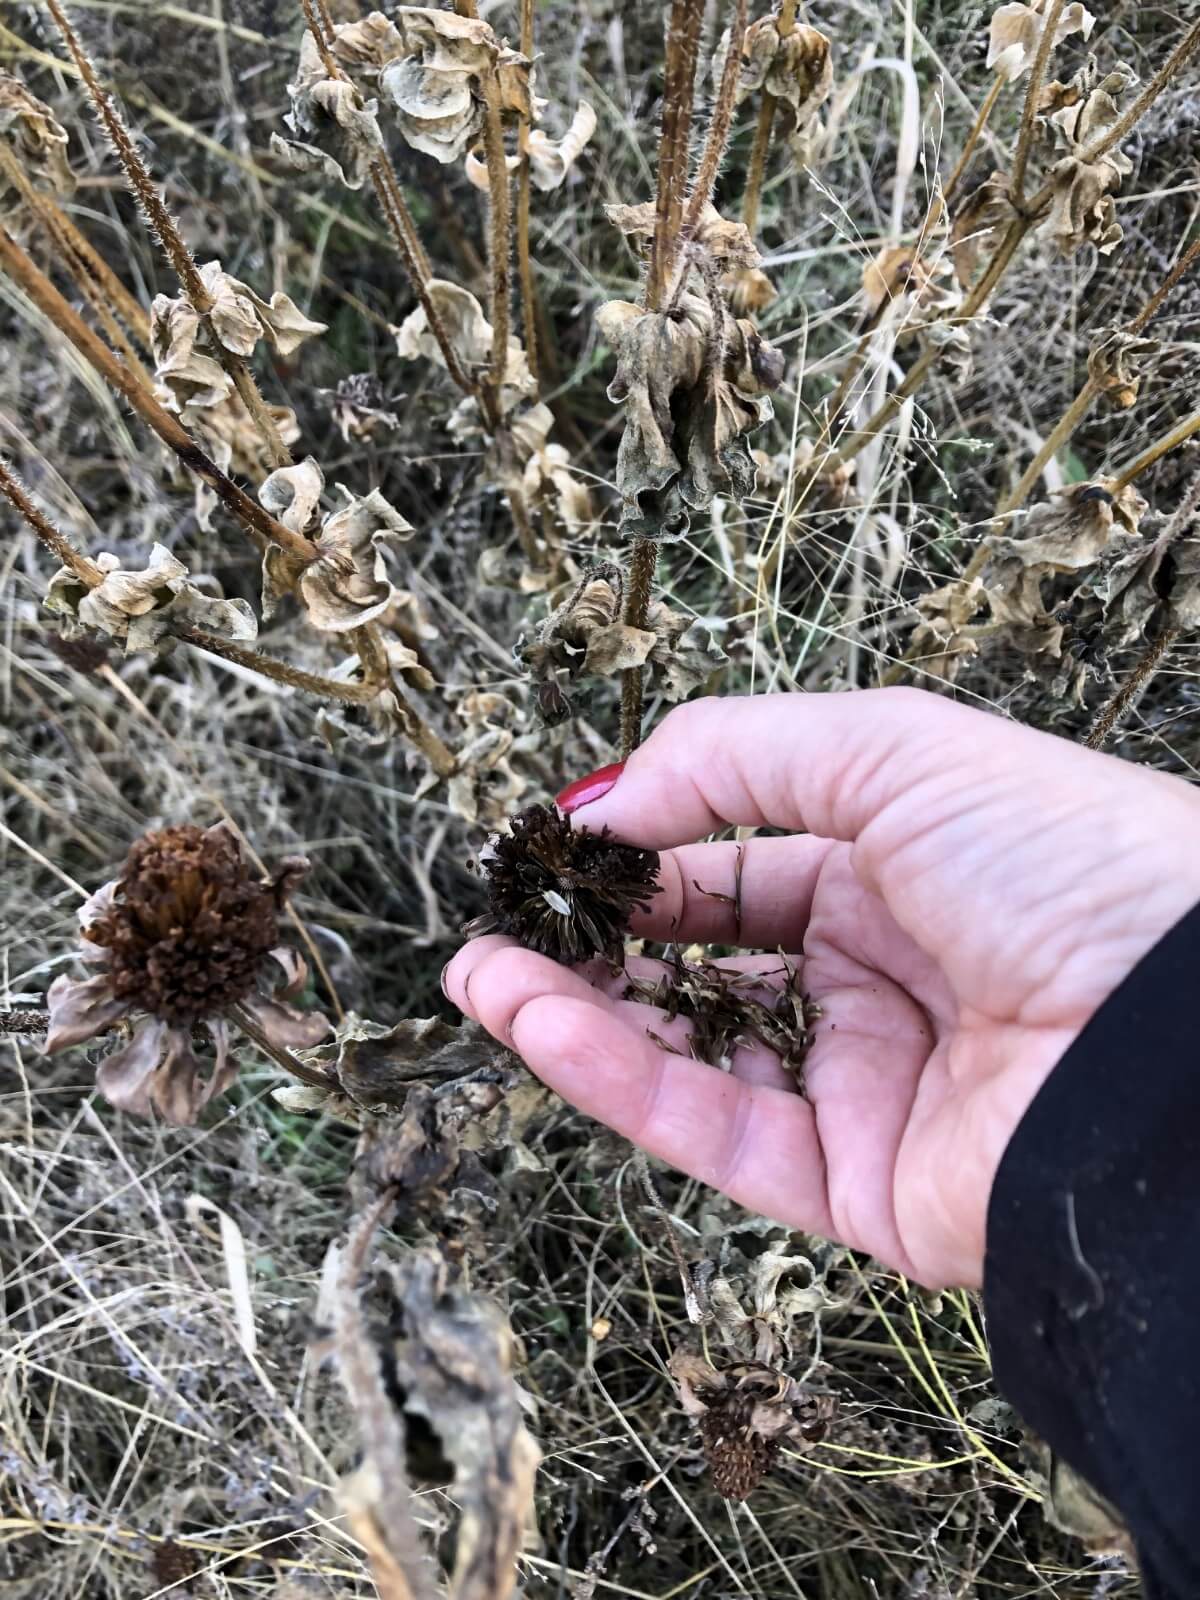 collecting seeds by rubbing off dried flower head